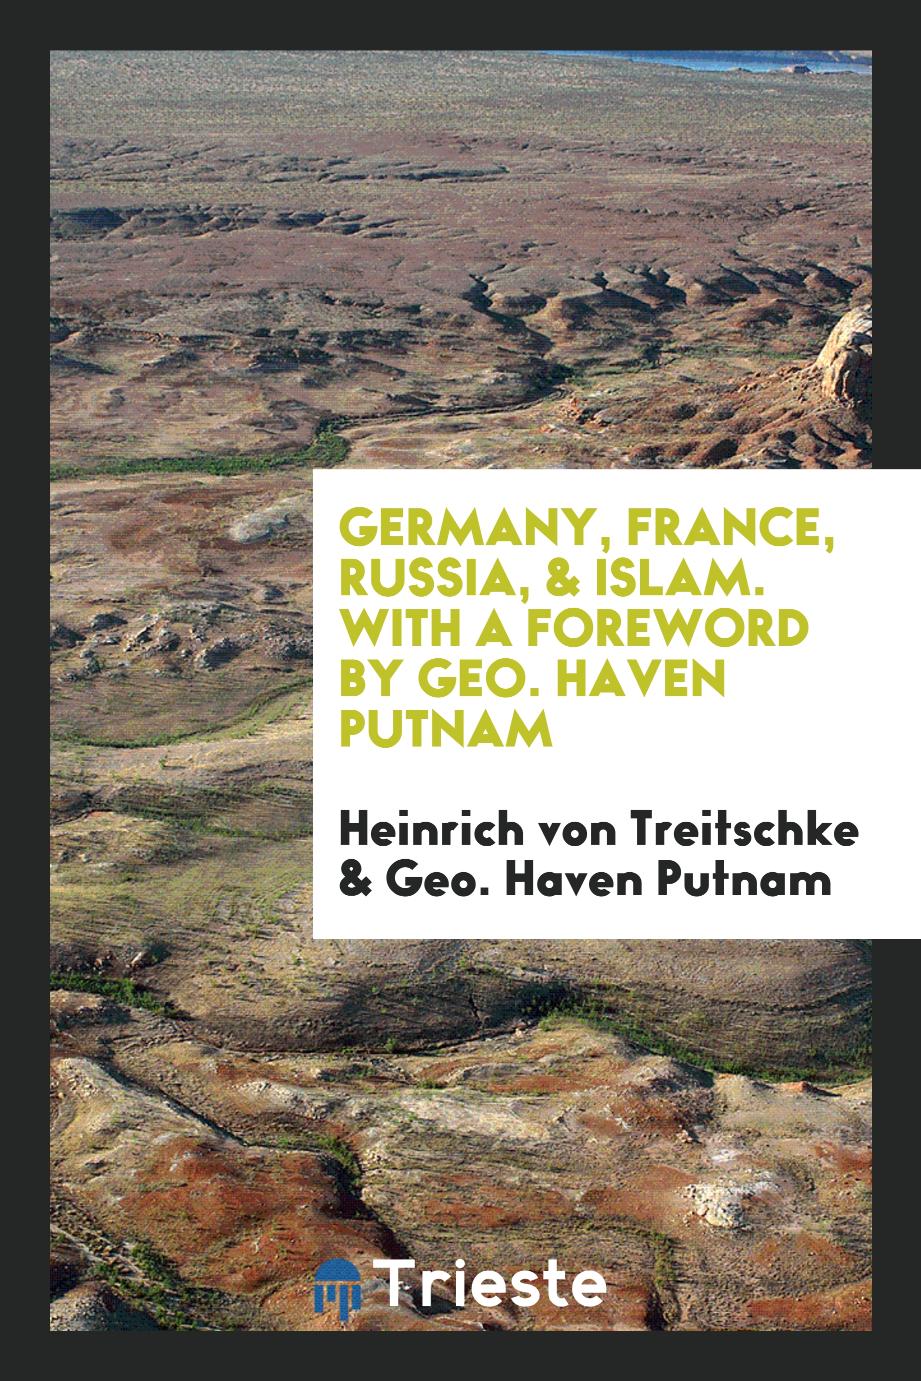 Germany, France, Russia, & Islam. With a Foreword by Geo. Haven Putnam